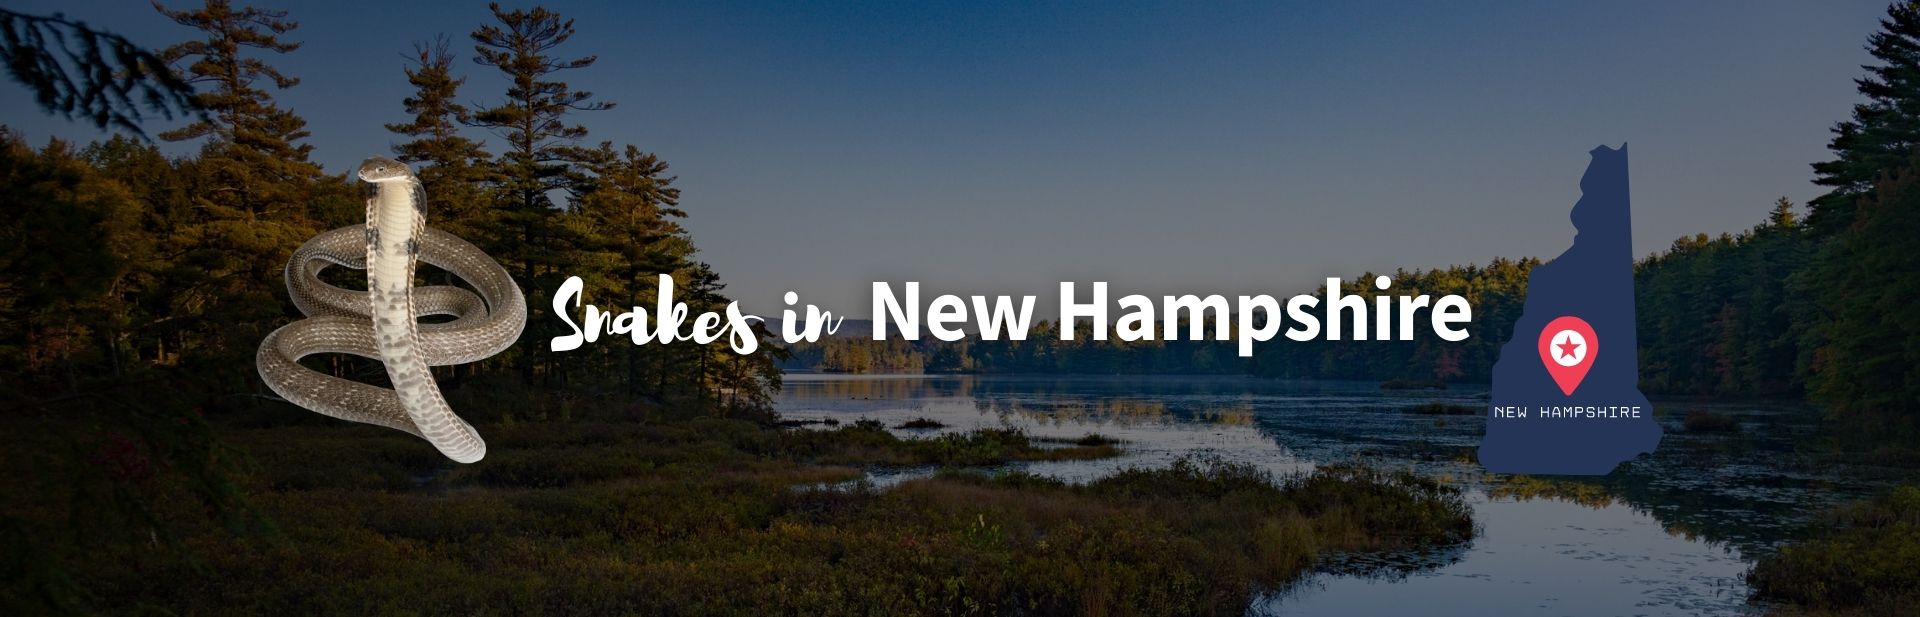 The 11 Different Types of Snakes in New Hampshire (ID Guide and Photos)